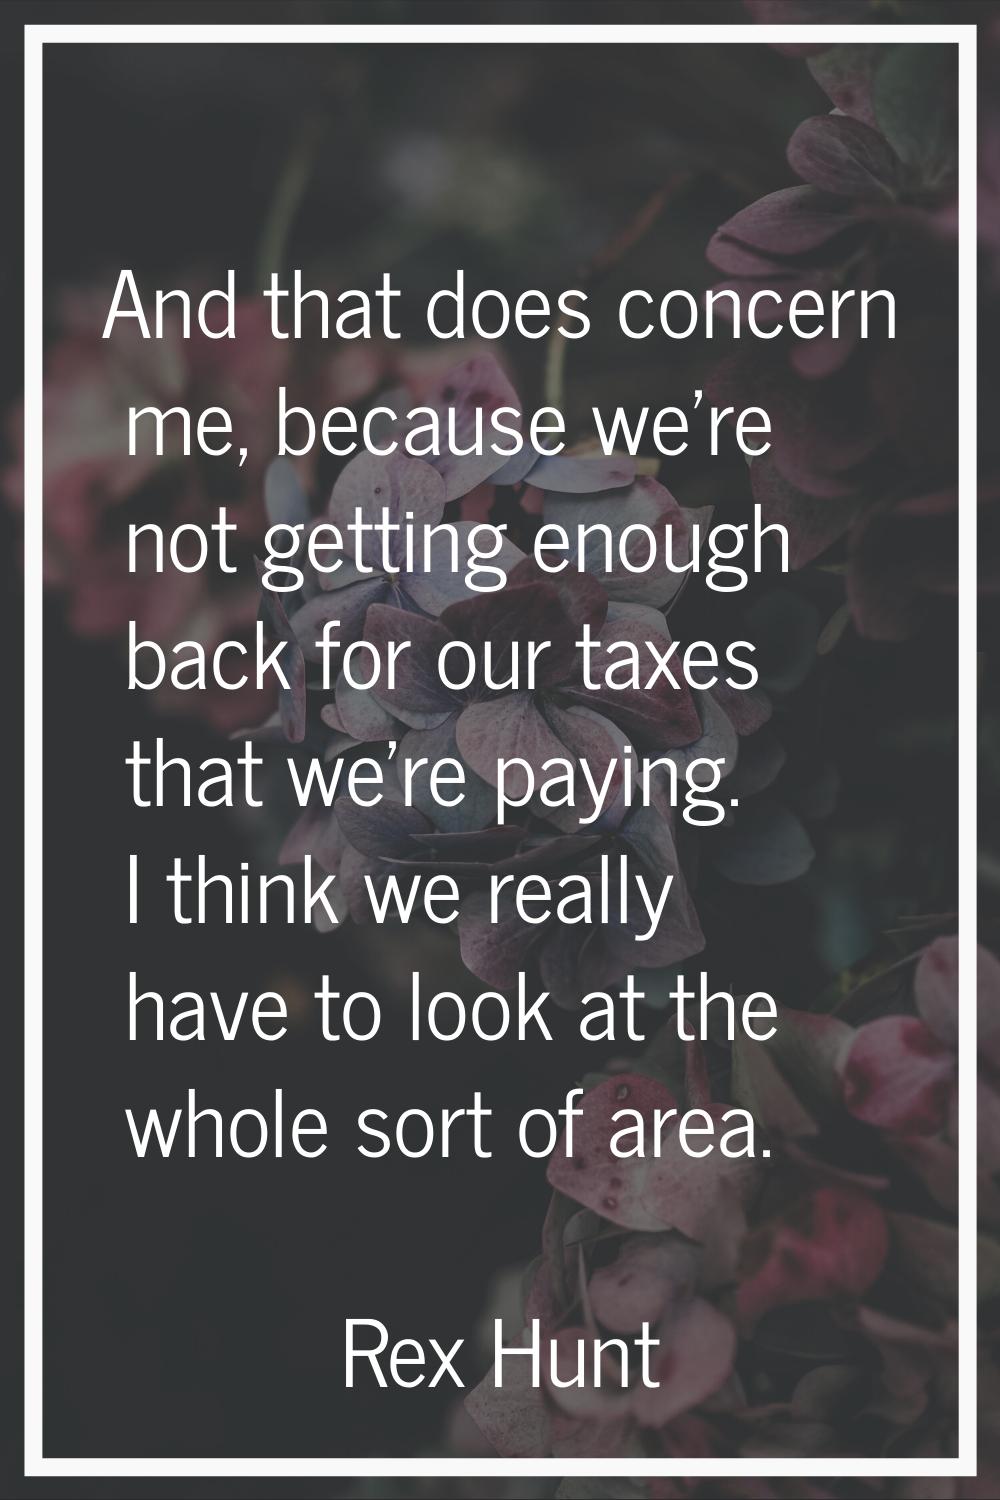 And that does concern me, because we're not getting enough back for our taxes that we're paying. I 